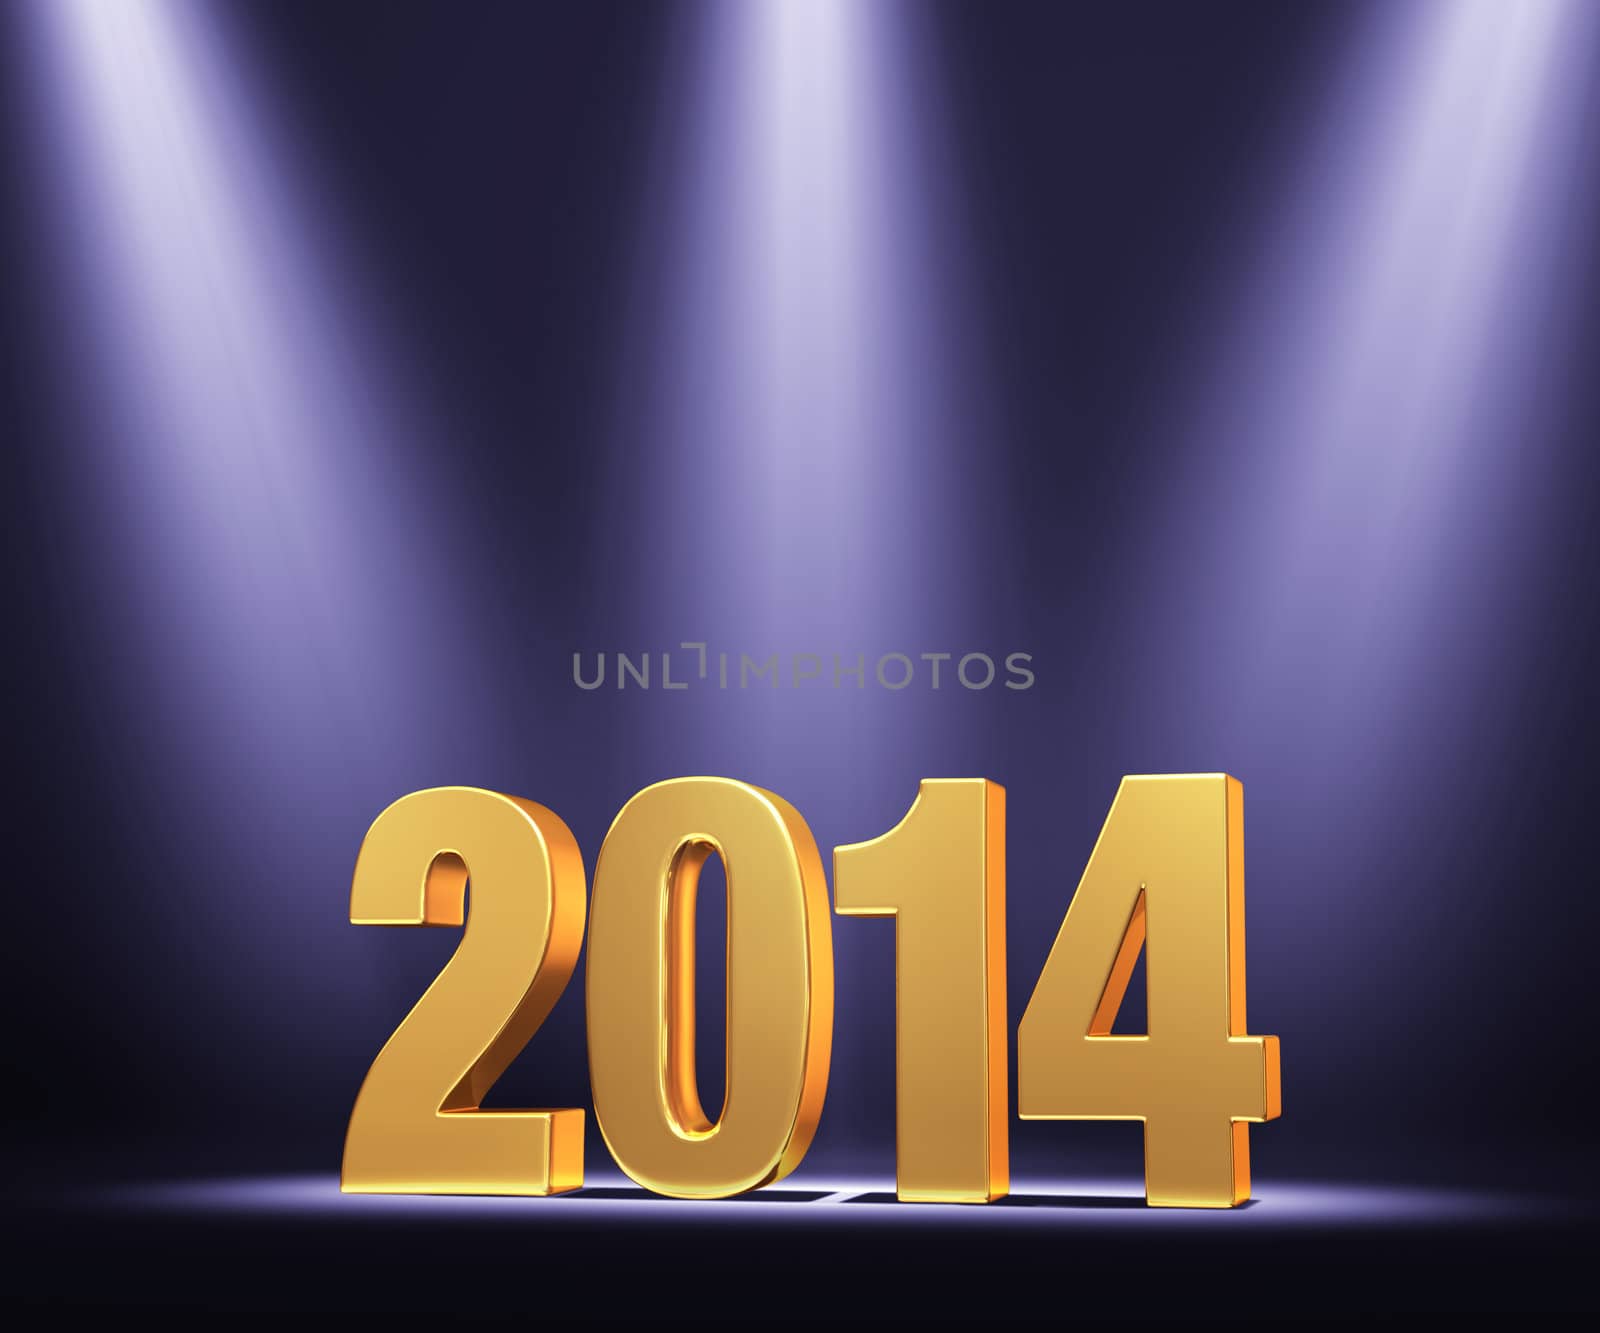 Presenting The New Year, 2014 by Em3